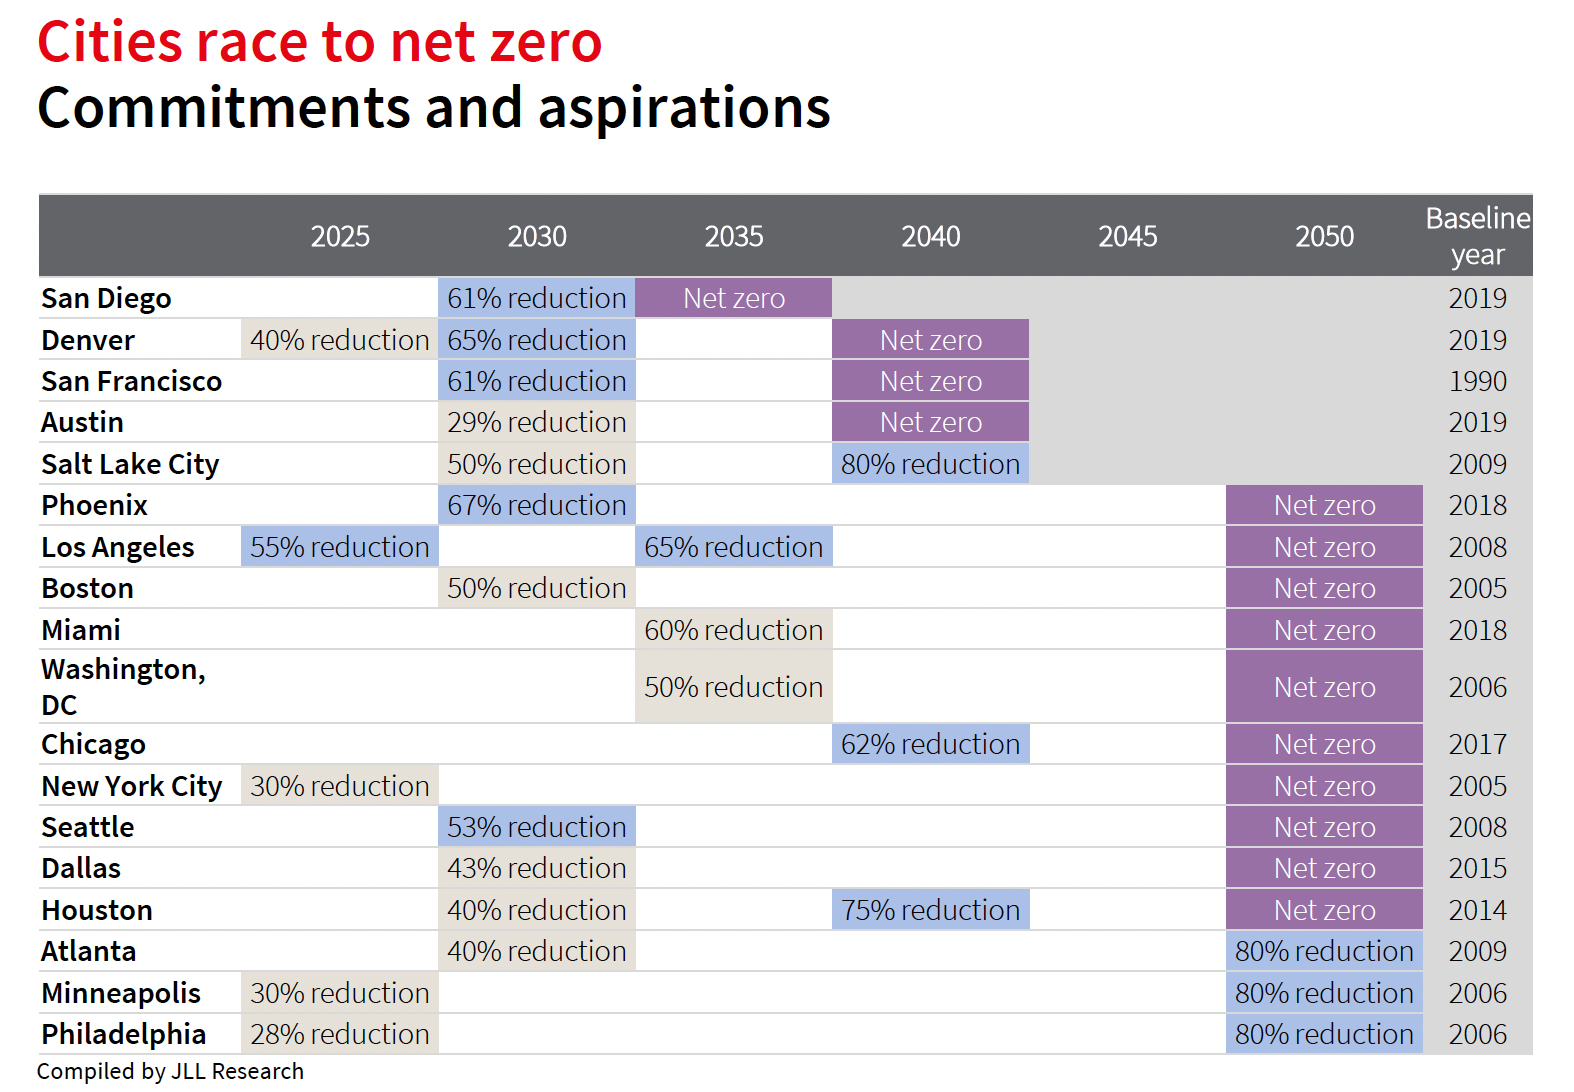 Cities' decarbonization ambitions and actions have different timetables.